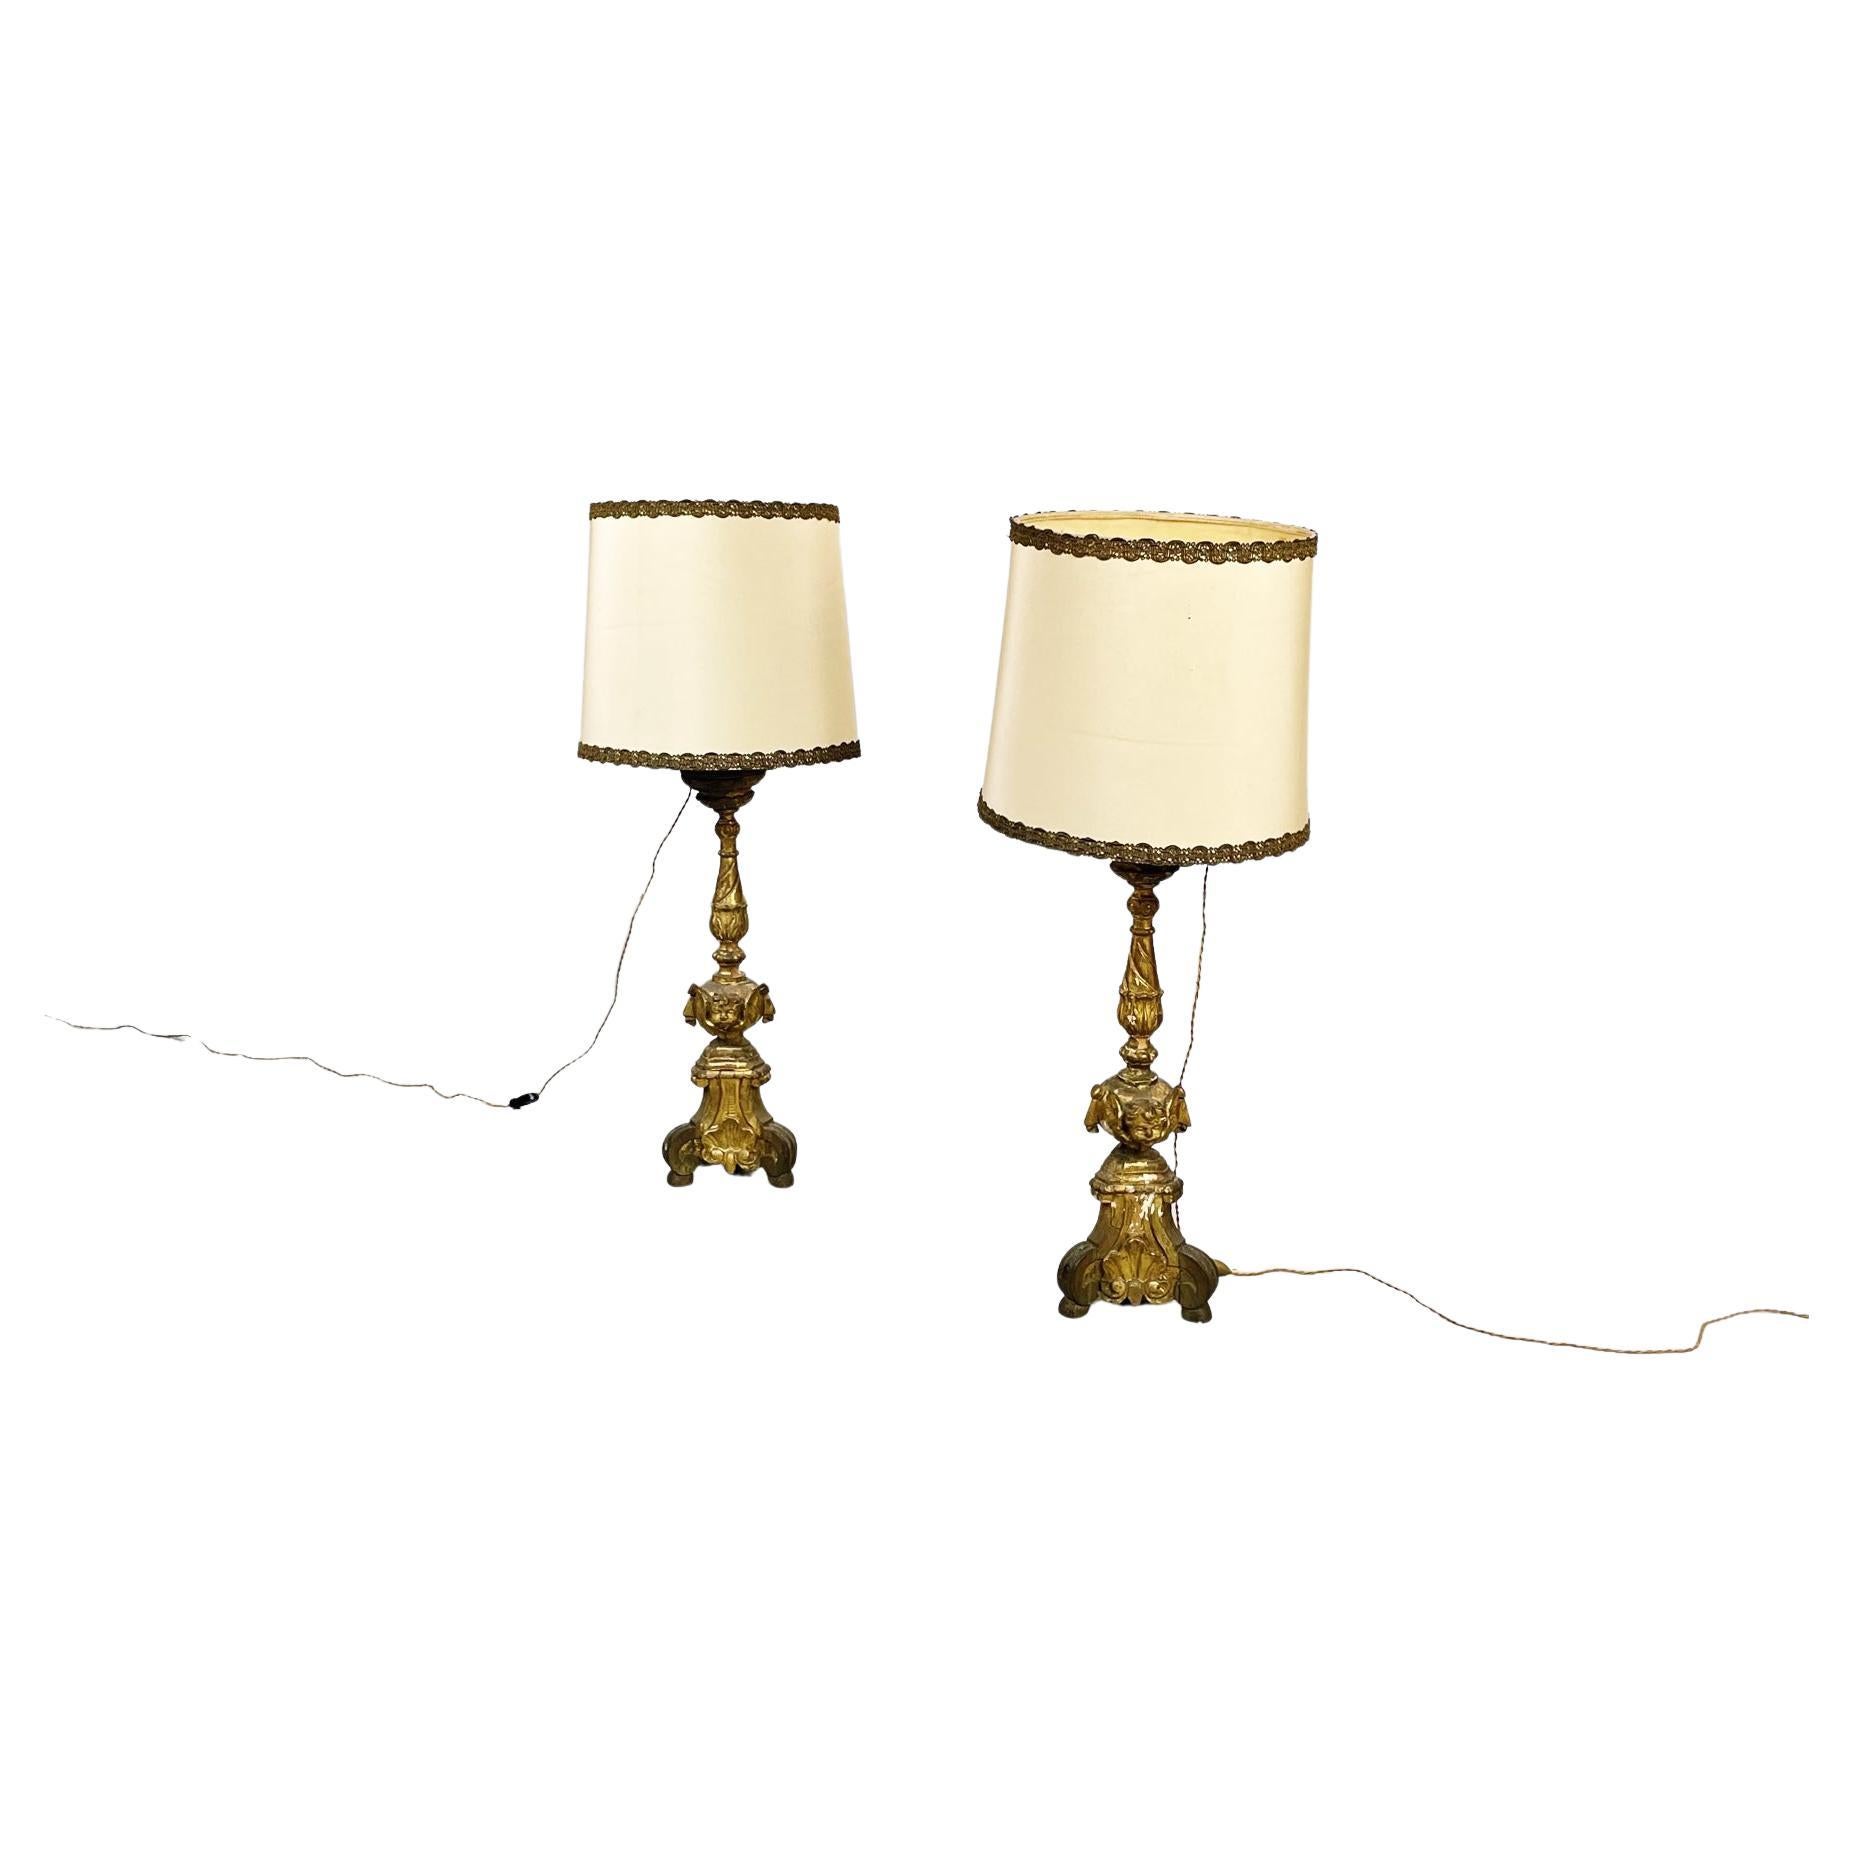 Italian Antique Candelabra Lamps in Gold Painted Wood and Beige Fabric, 1800s For Sale